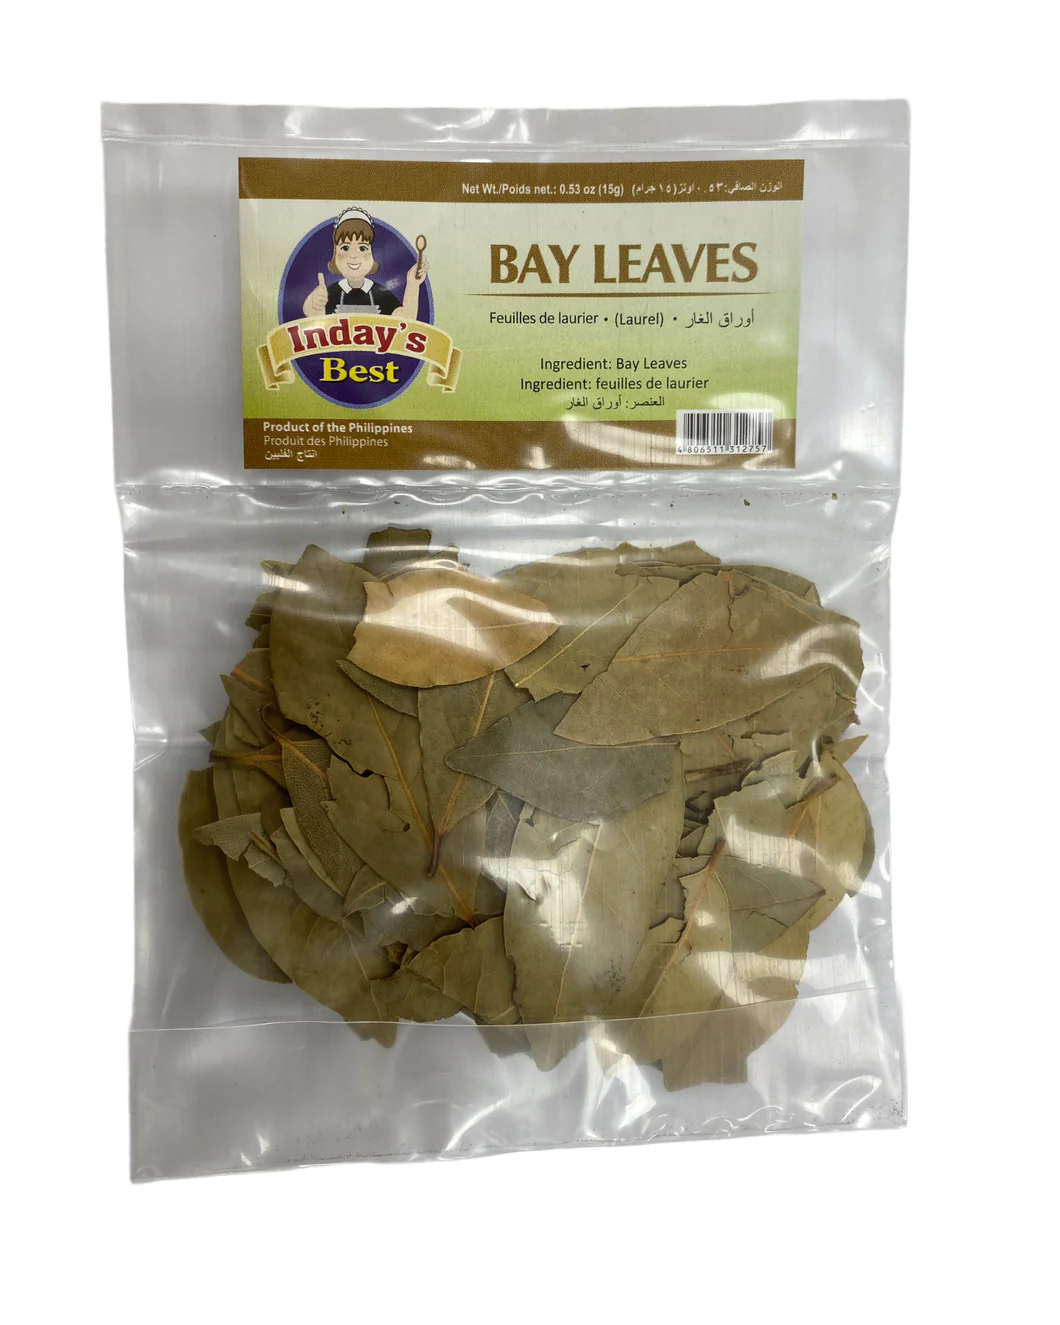 INDAY'S BEST BAY LEAVES